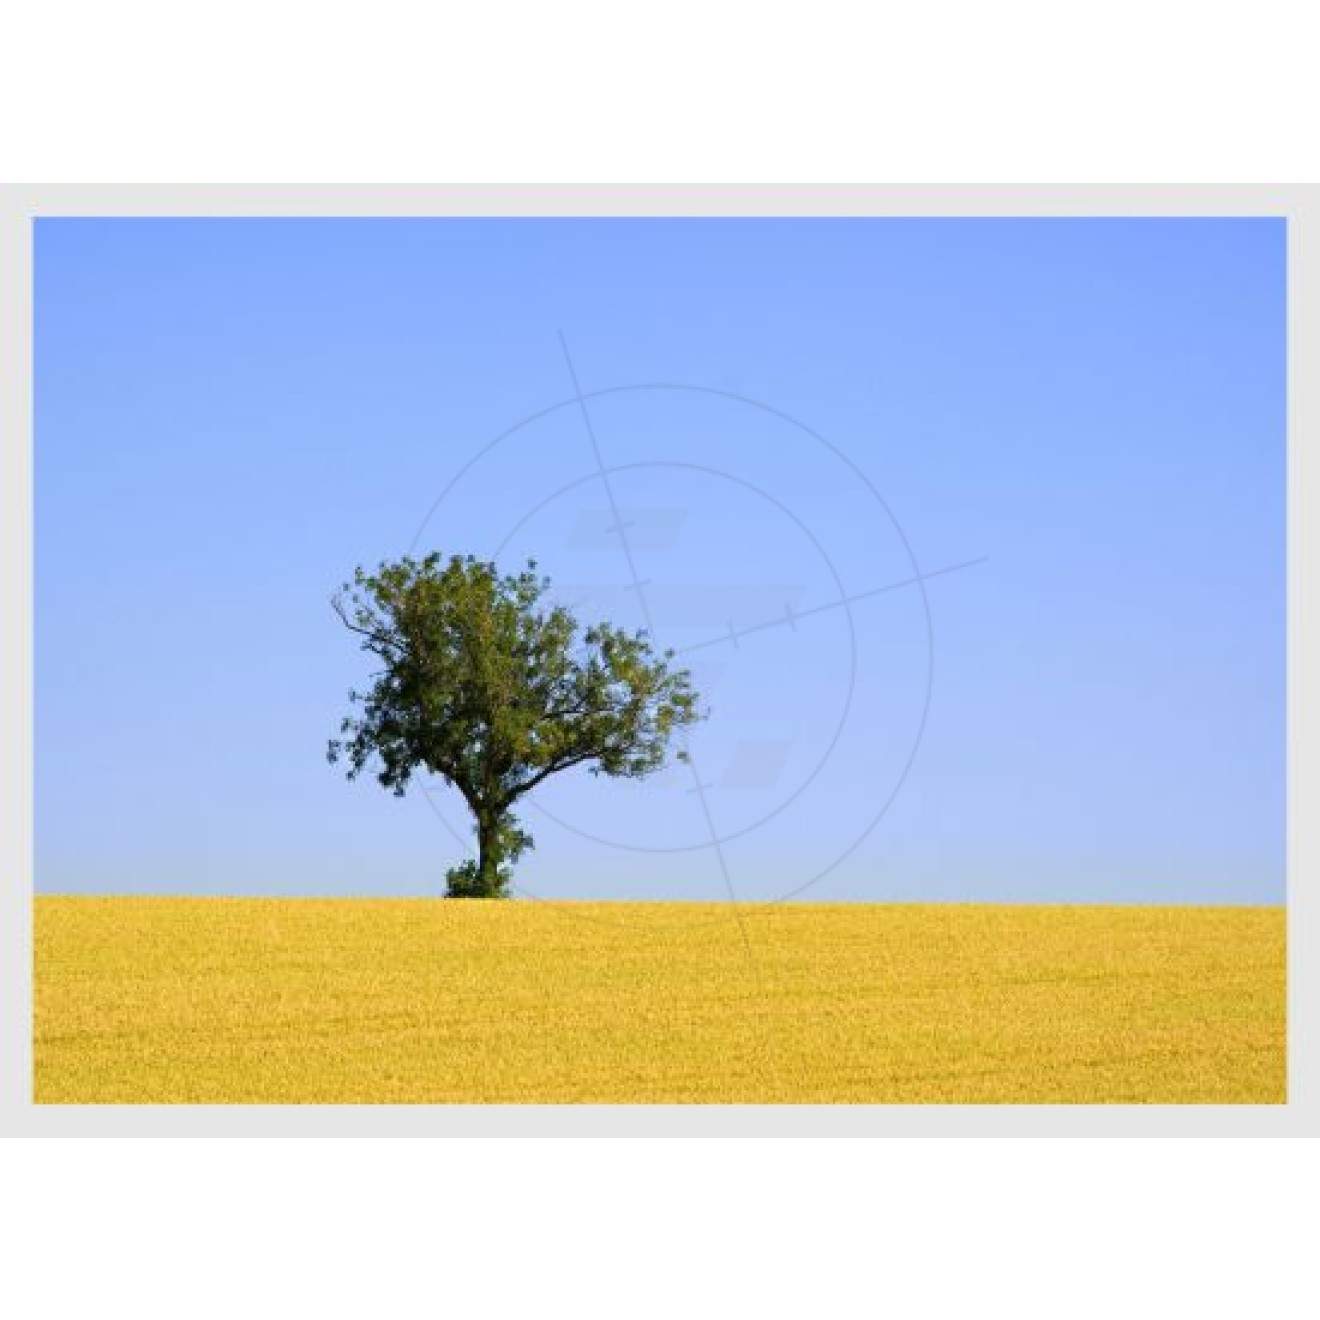 Wheat Field with tree